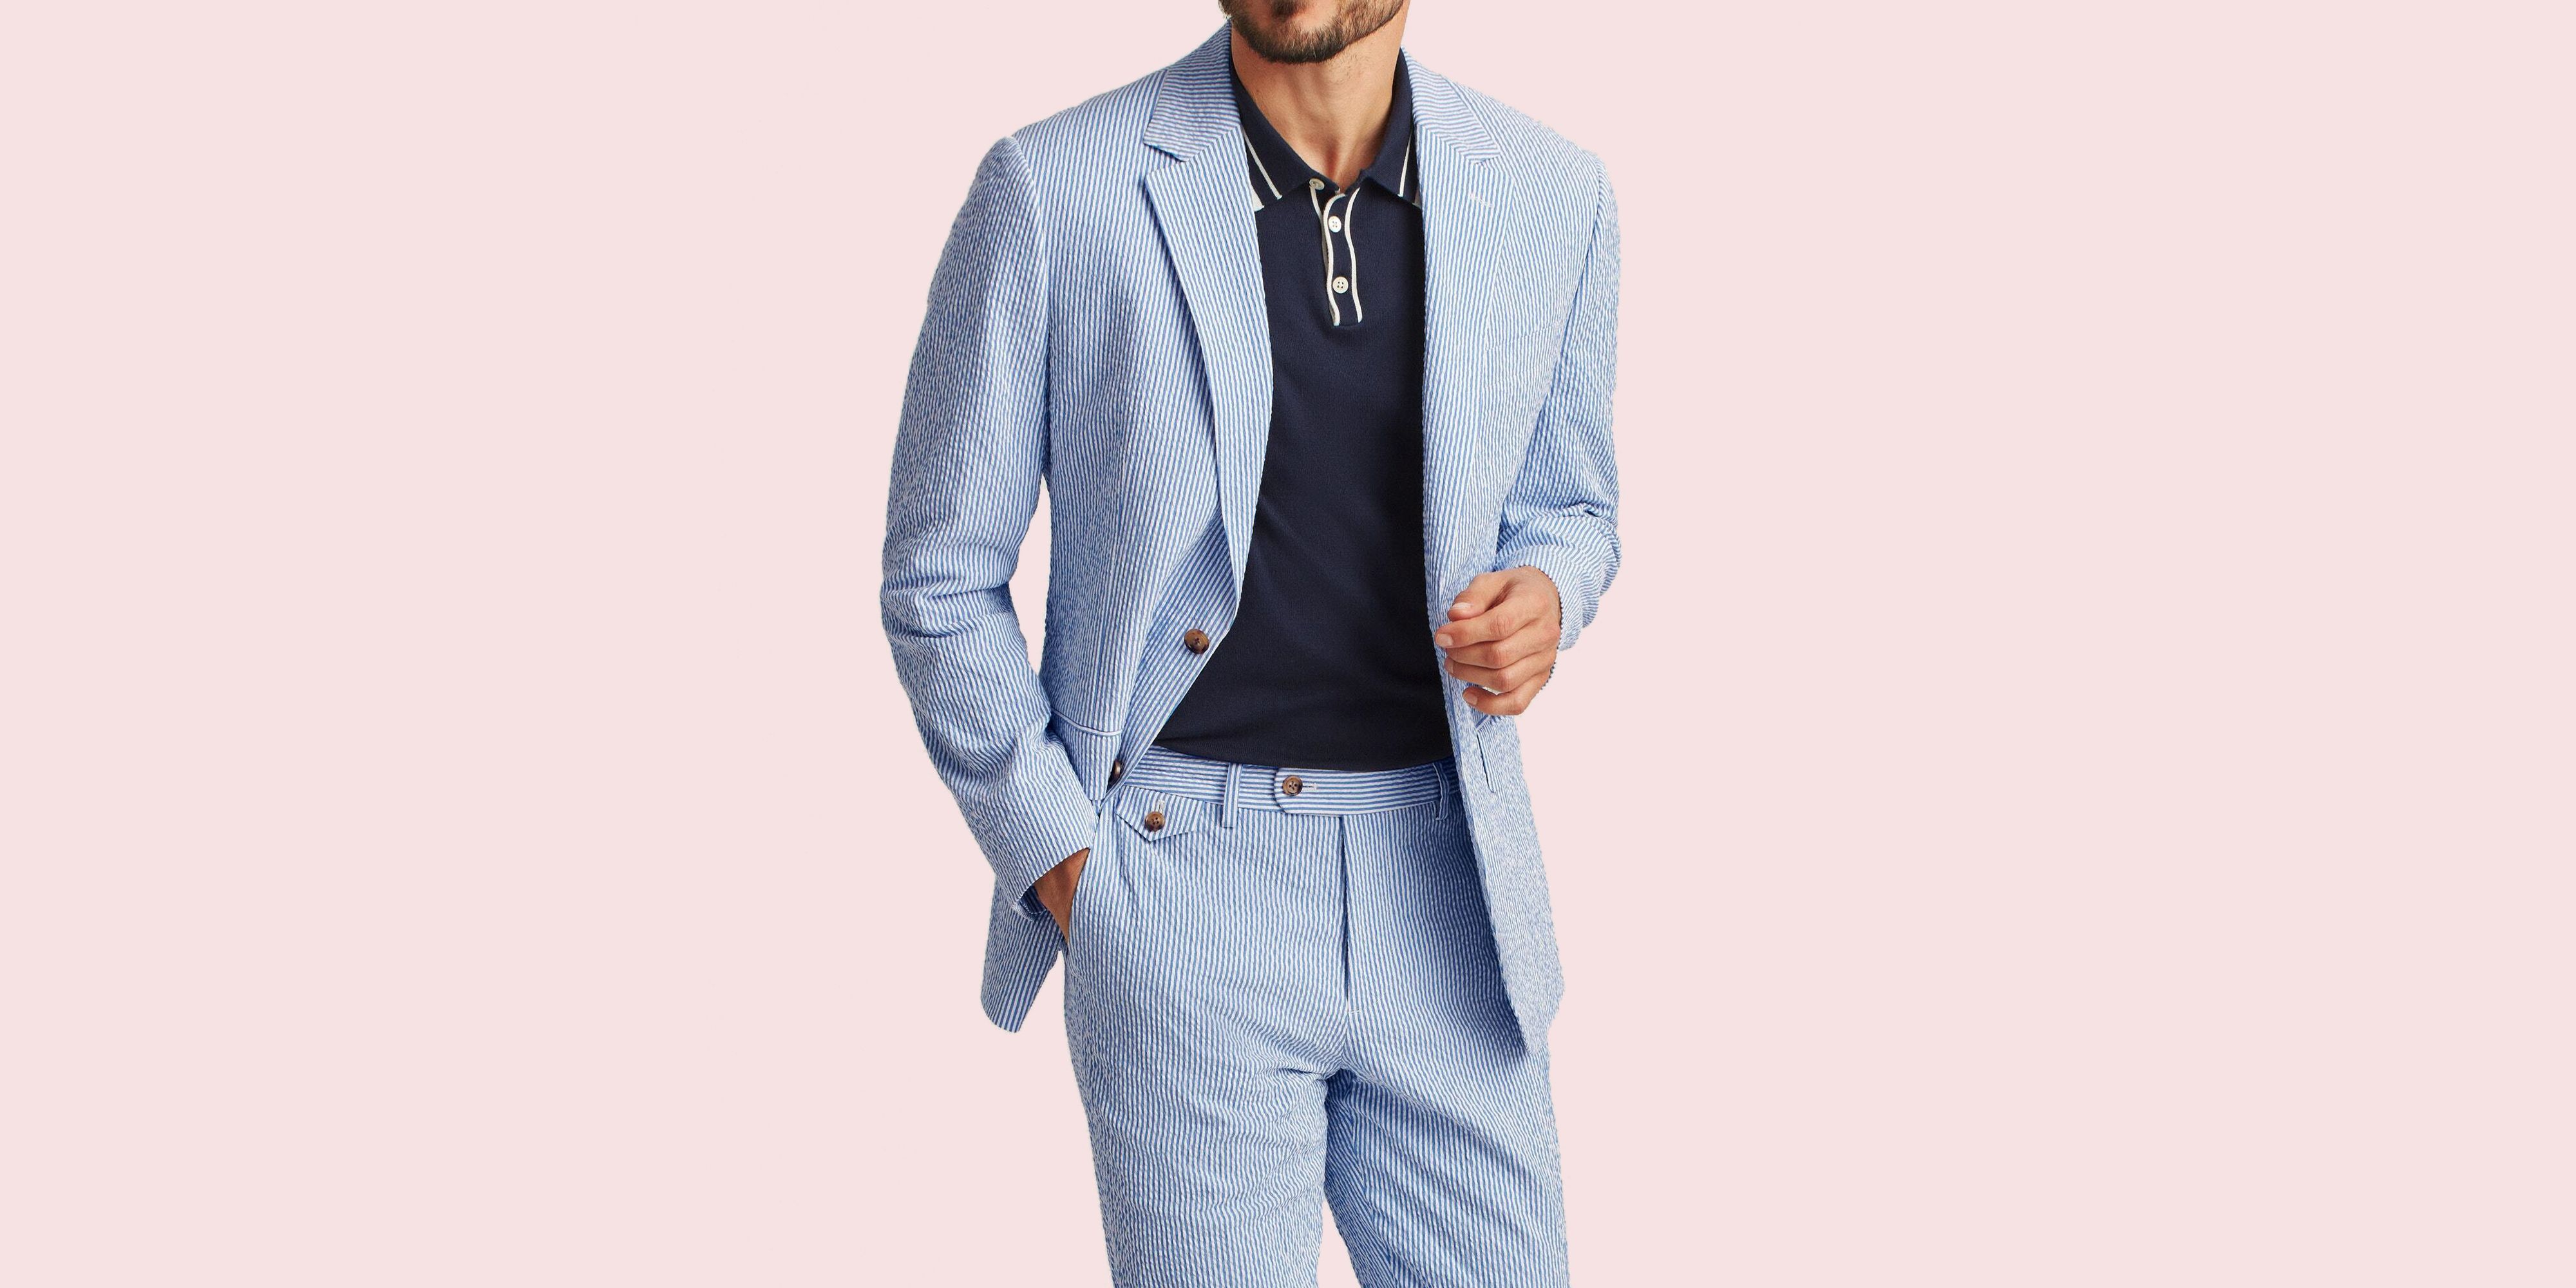 5 Summer Wedding Outfits for Men 2022 ...